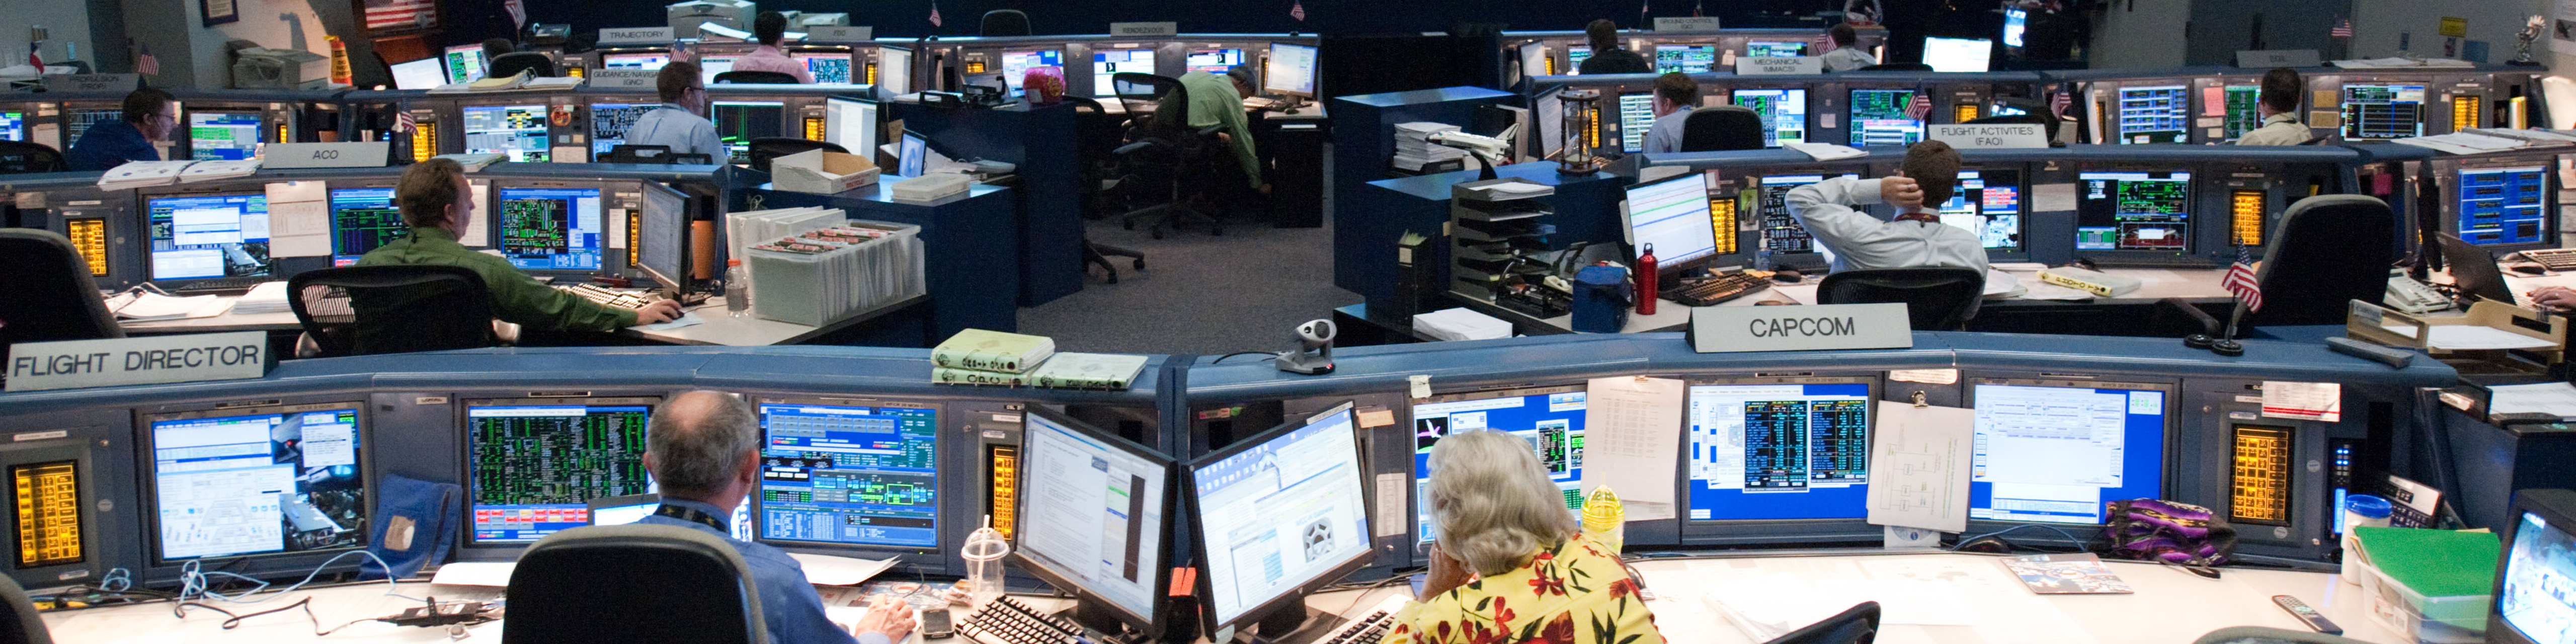 wide angle shot of nasa's mission control center, showing people sitting at computer terminals